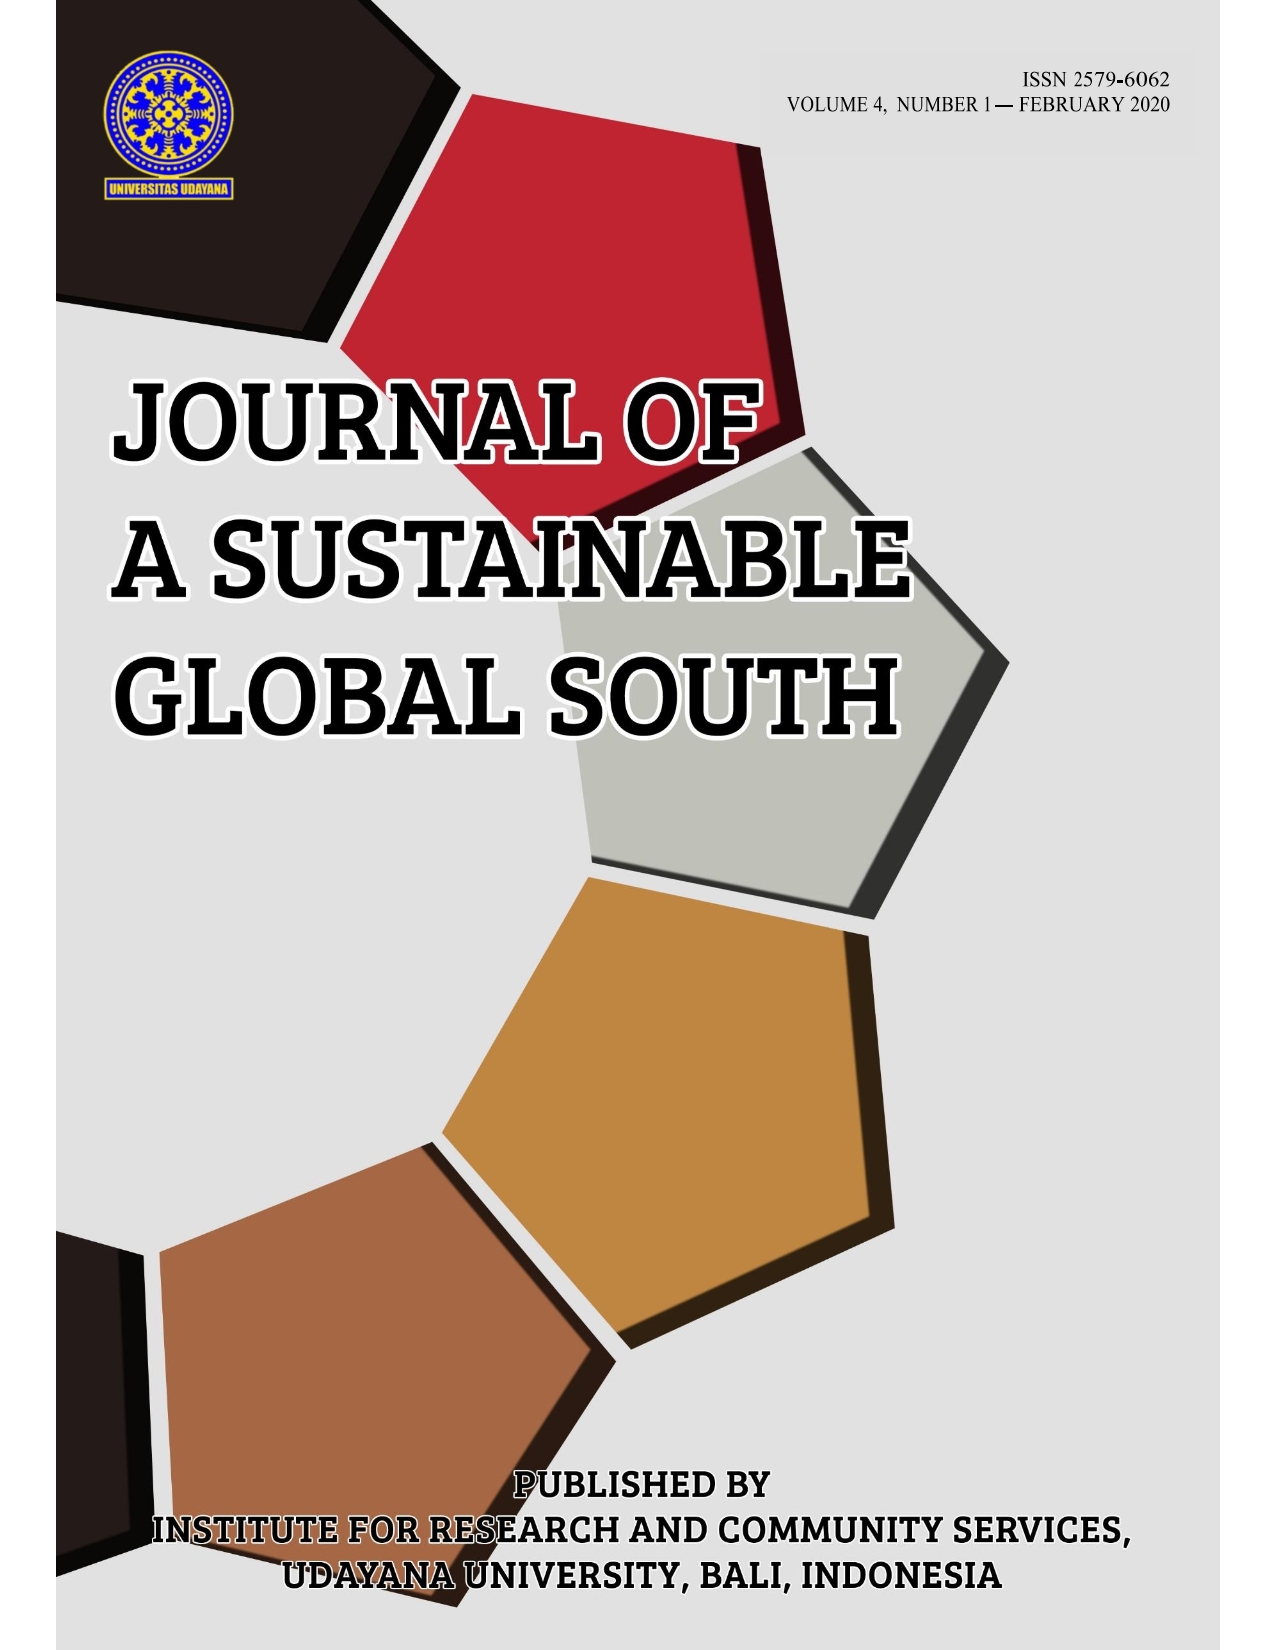 The Journal of A Sustainable Global South (JSGS) Udayana University